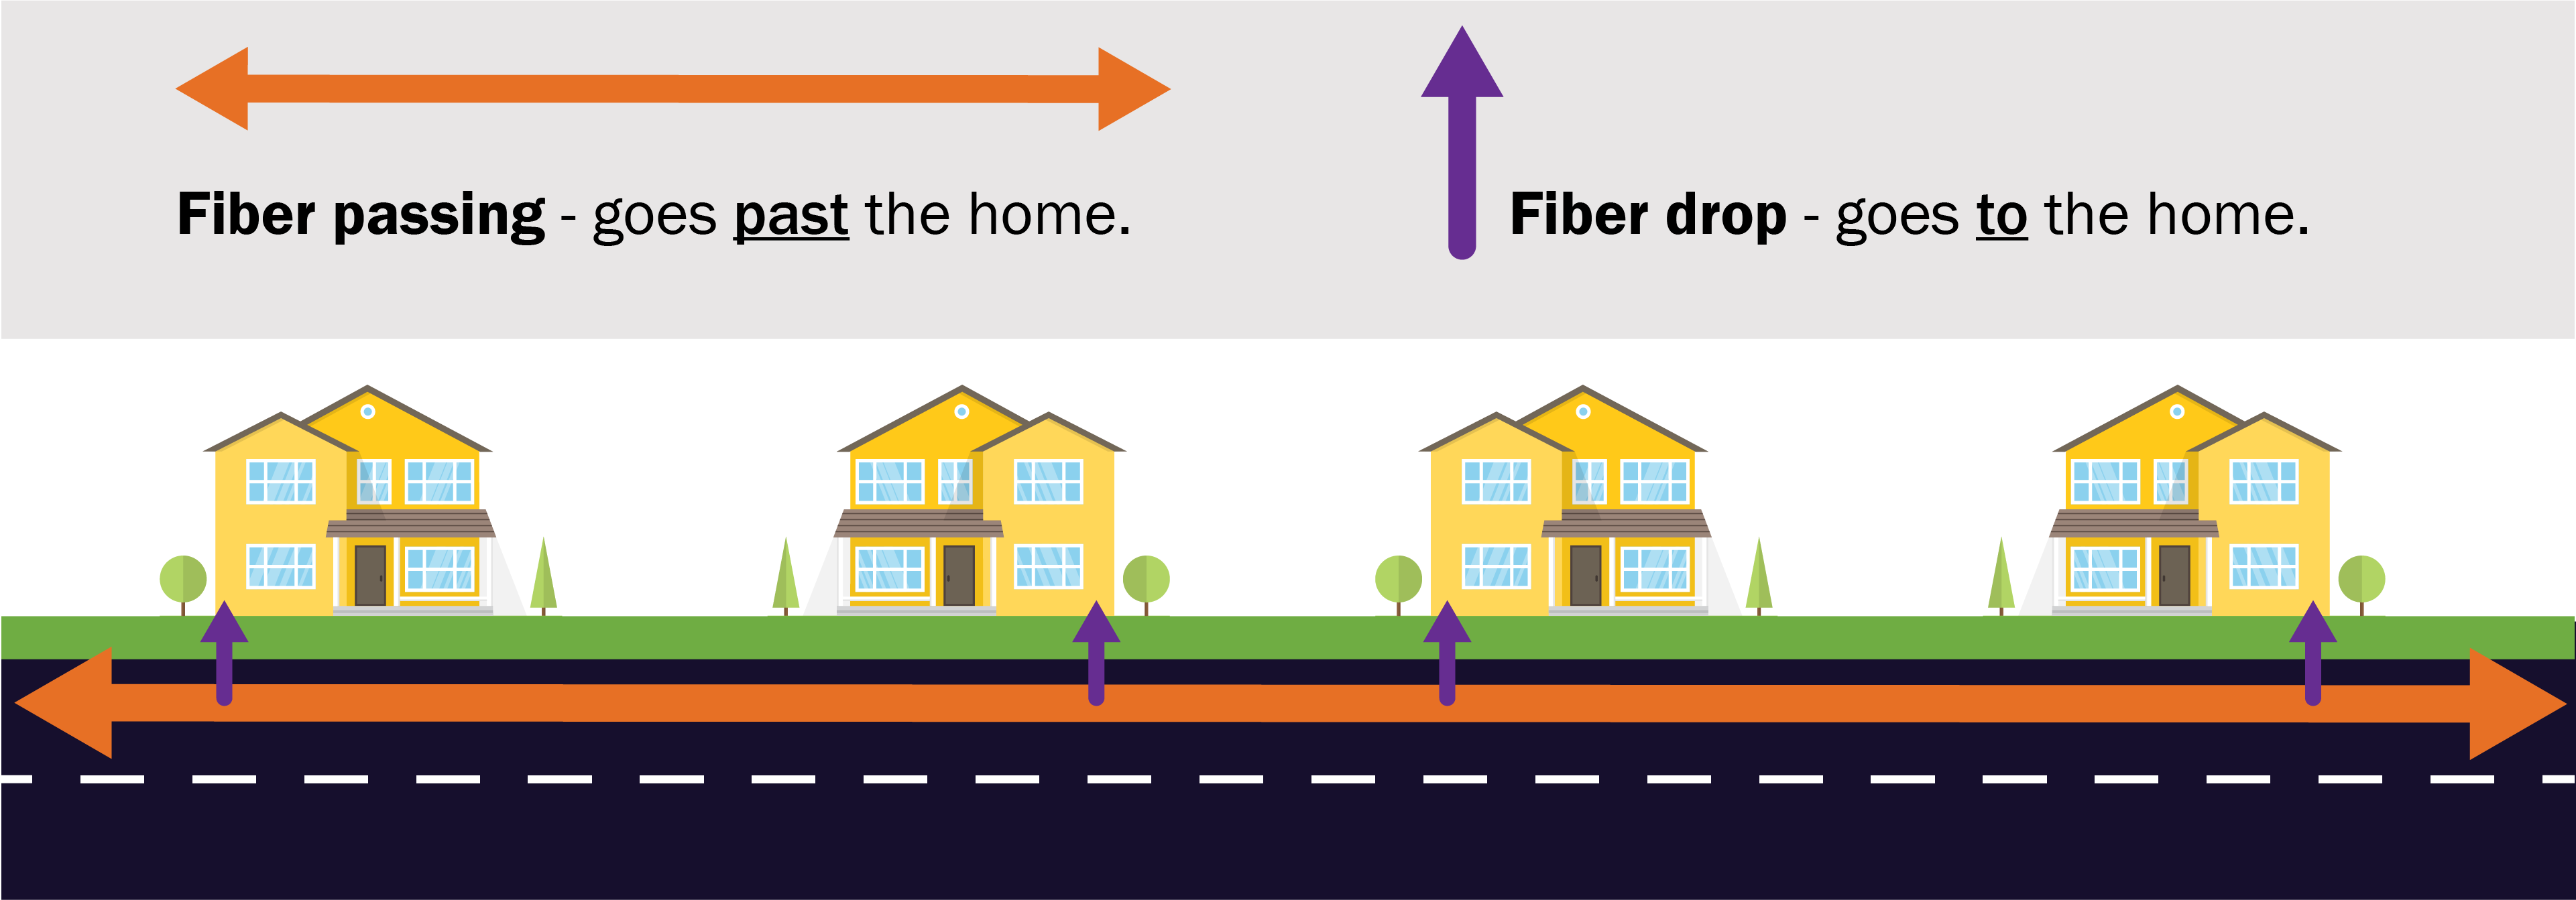 Diagram shows what fiber passing and fiber drop mean. A row of houses on a street with an orange line going down the road passed the houses. this is the fiber passing. Purple arrows point up from the orange line and connect to the houses, representing the fiber drops.